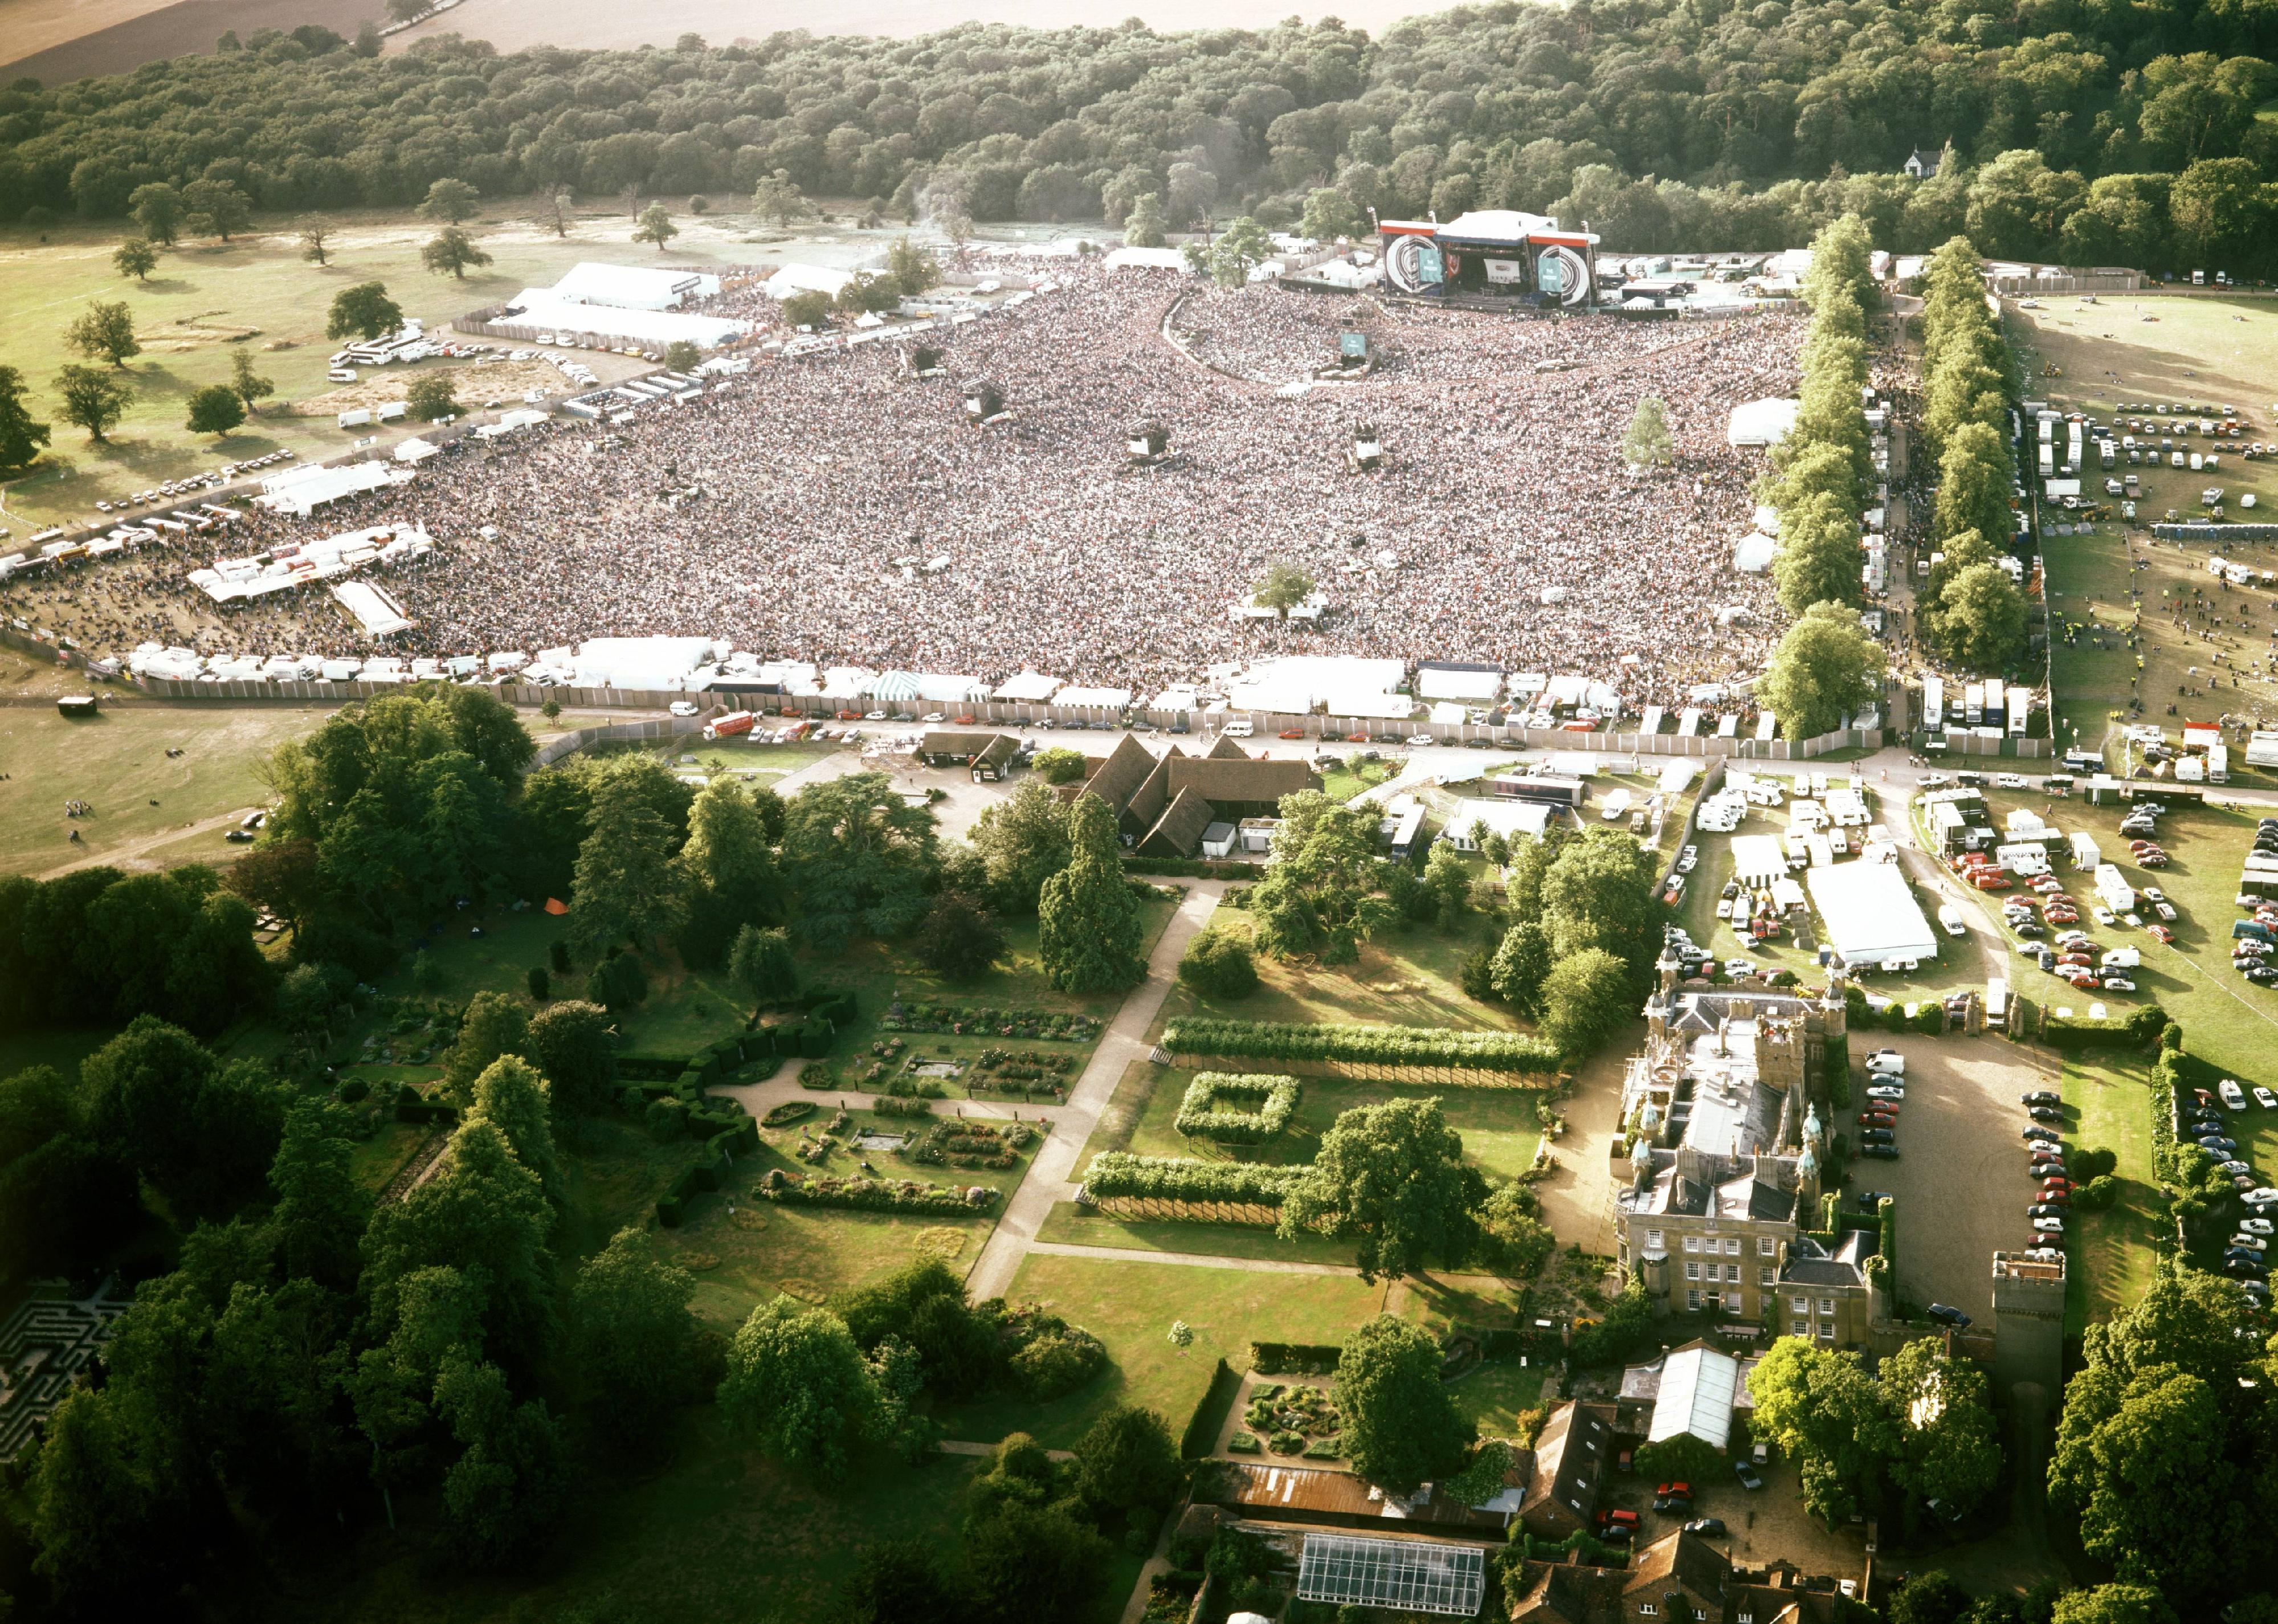 Aerial shot of the Oasis show.